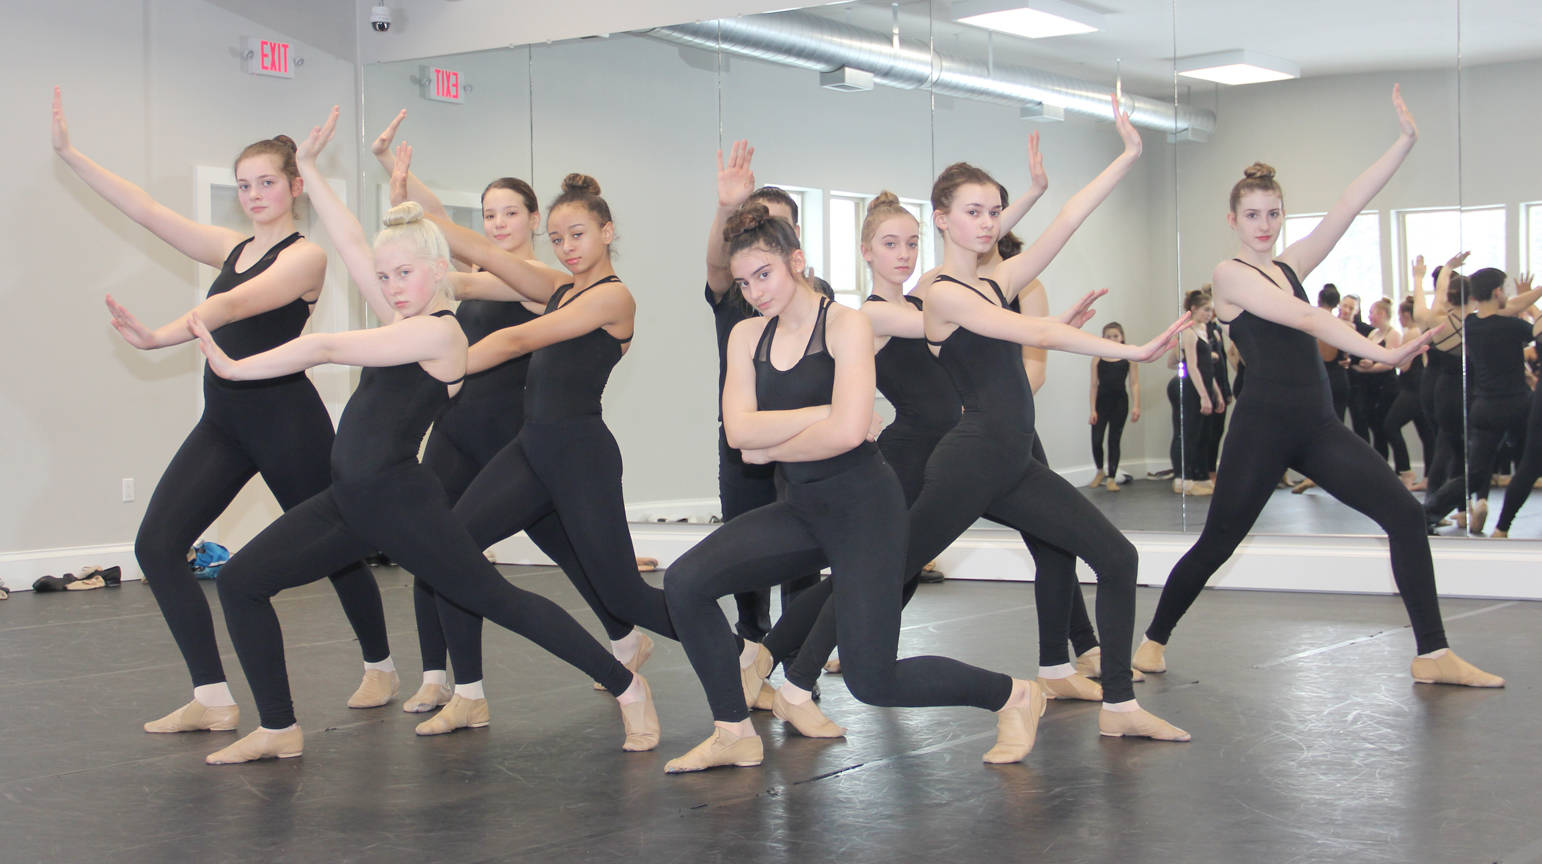 Jazz, Ballet, and Hip Hop and Tap dancers will all show their steps in “I Wanna Rock!”